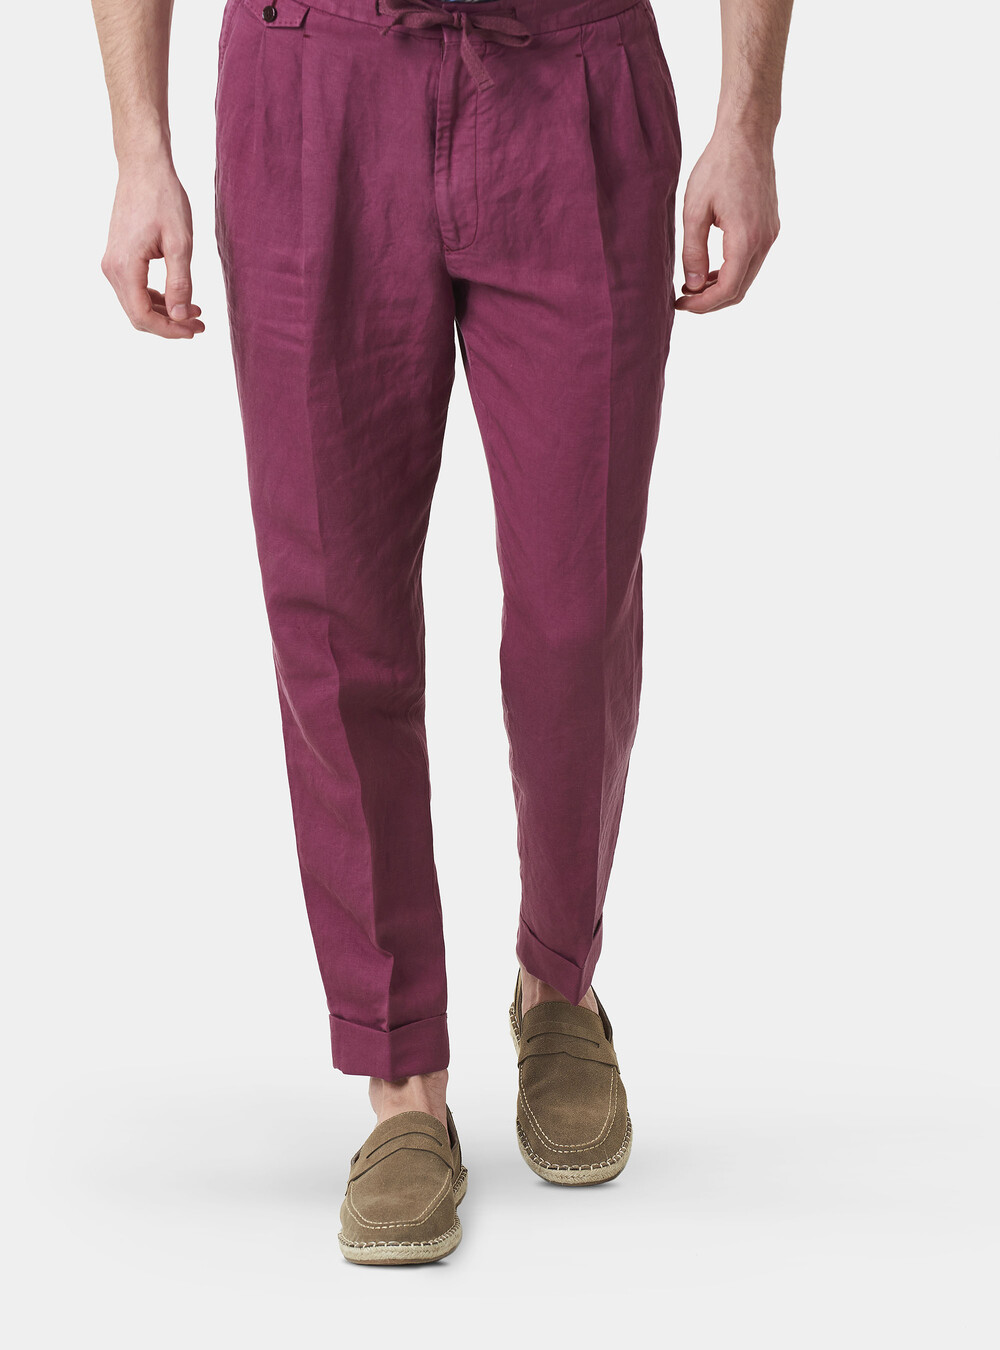 Linen blend trousers with elastic and drawstrings